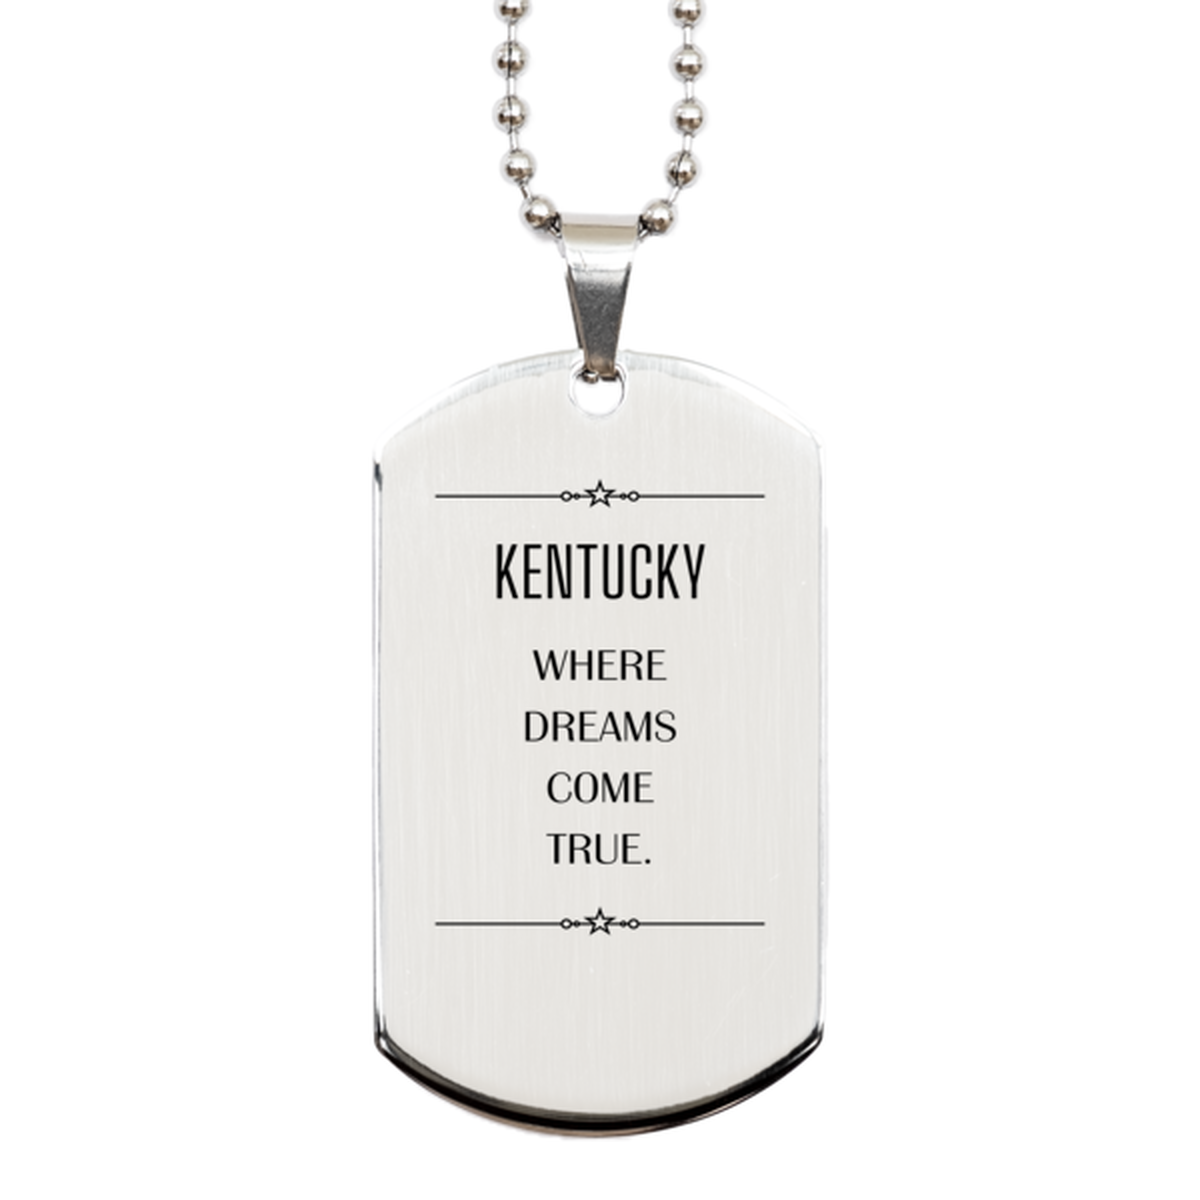 Love Kentucky State Silver Dog Tag, Kentucky Where dreams come true, Birthday Inspirational Gifts For Kentucky Men, Women, Friends